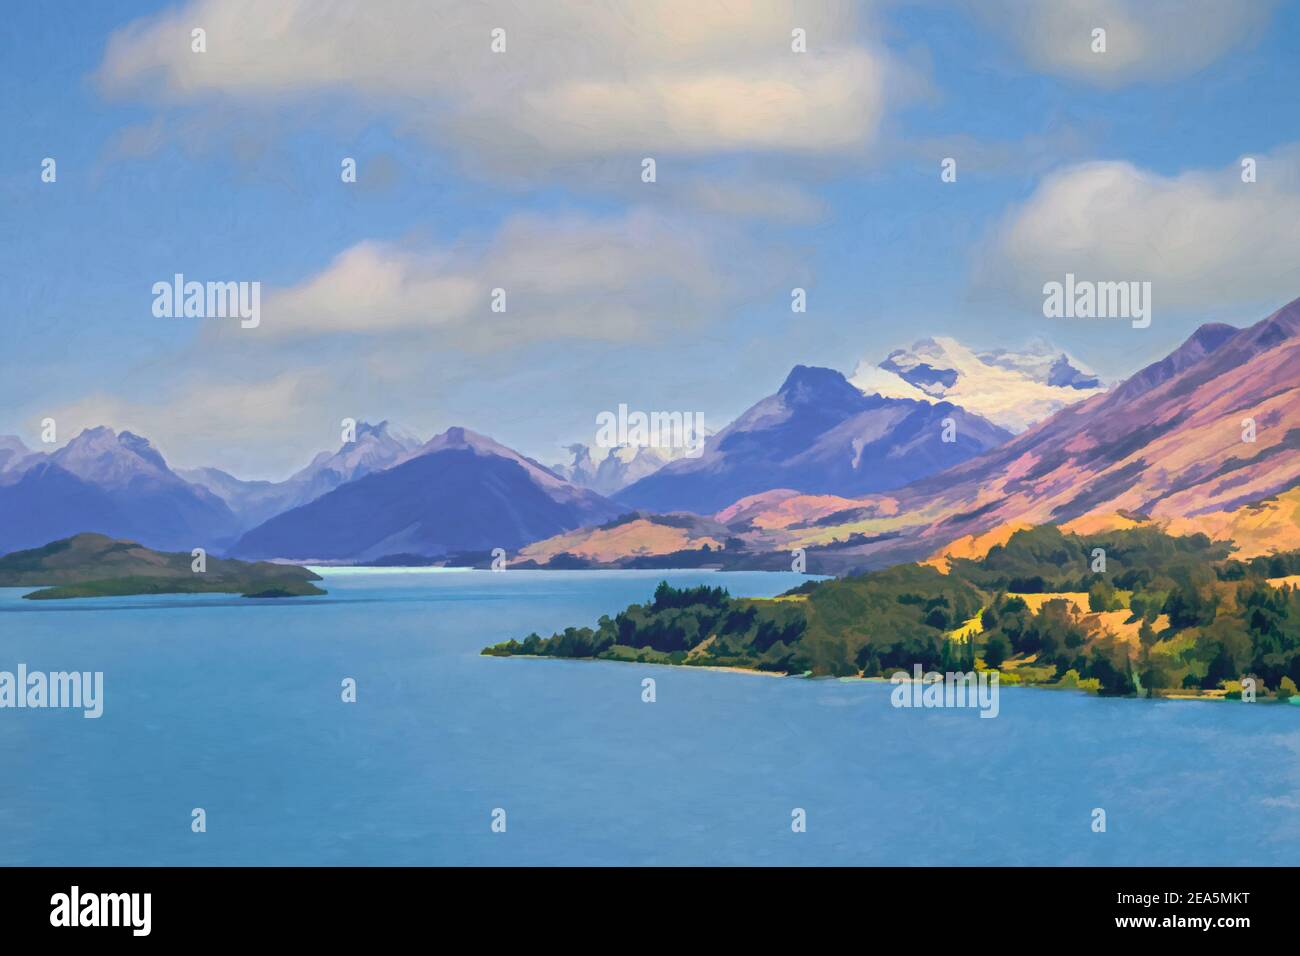 Digital painting of a view of snow-covered alps, across Lake Wakatipu, New Zealand. Stock Photo